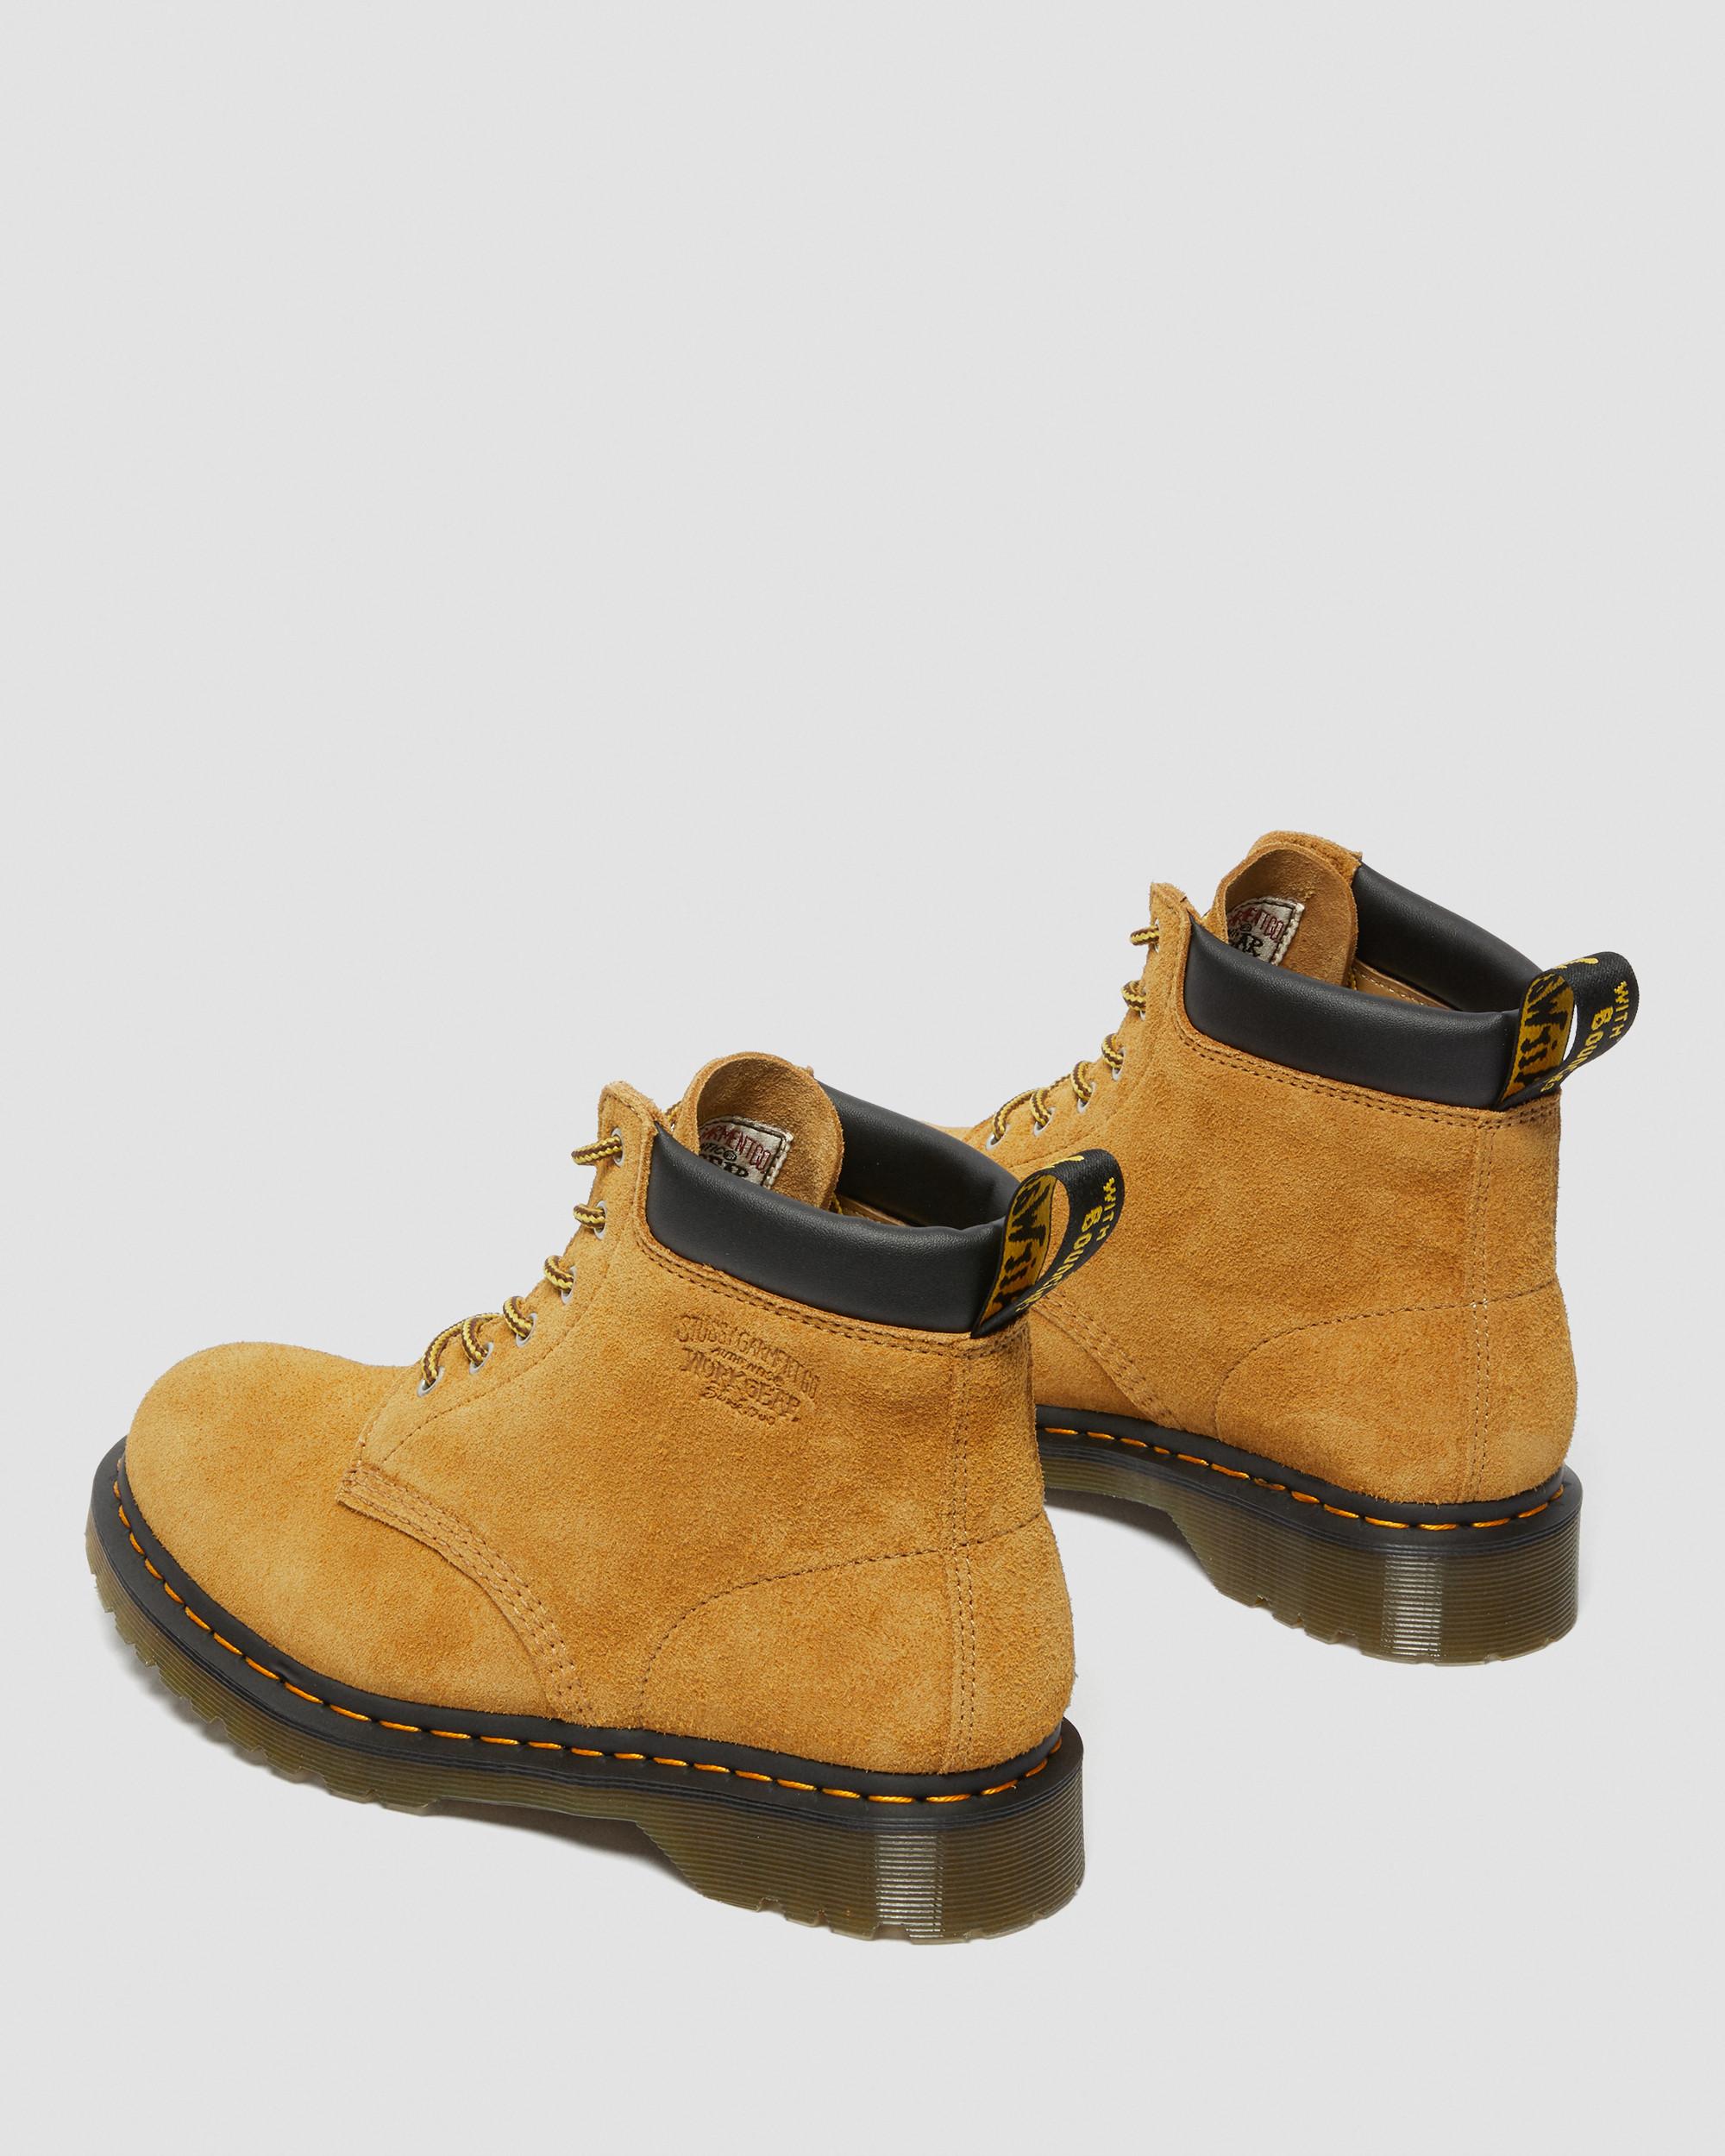 939 Stüssy Suede Ankle Boots in Brown | Dr. Martens